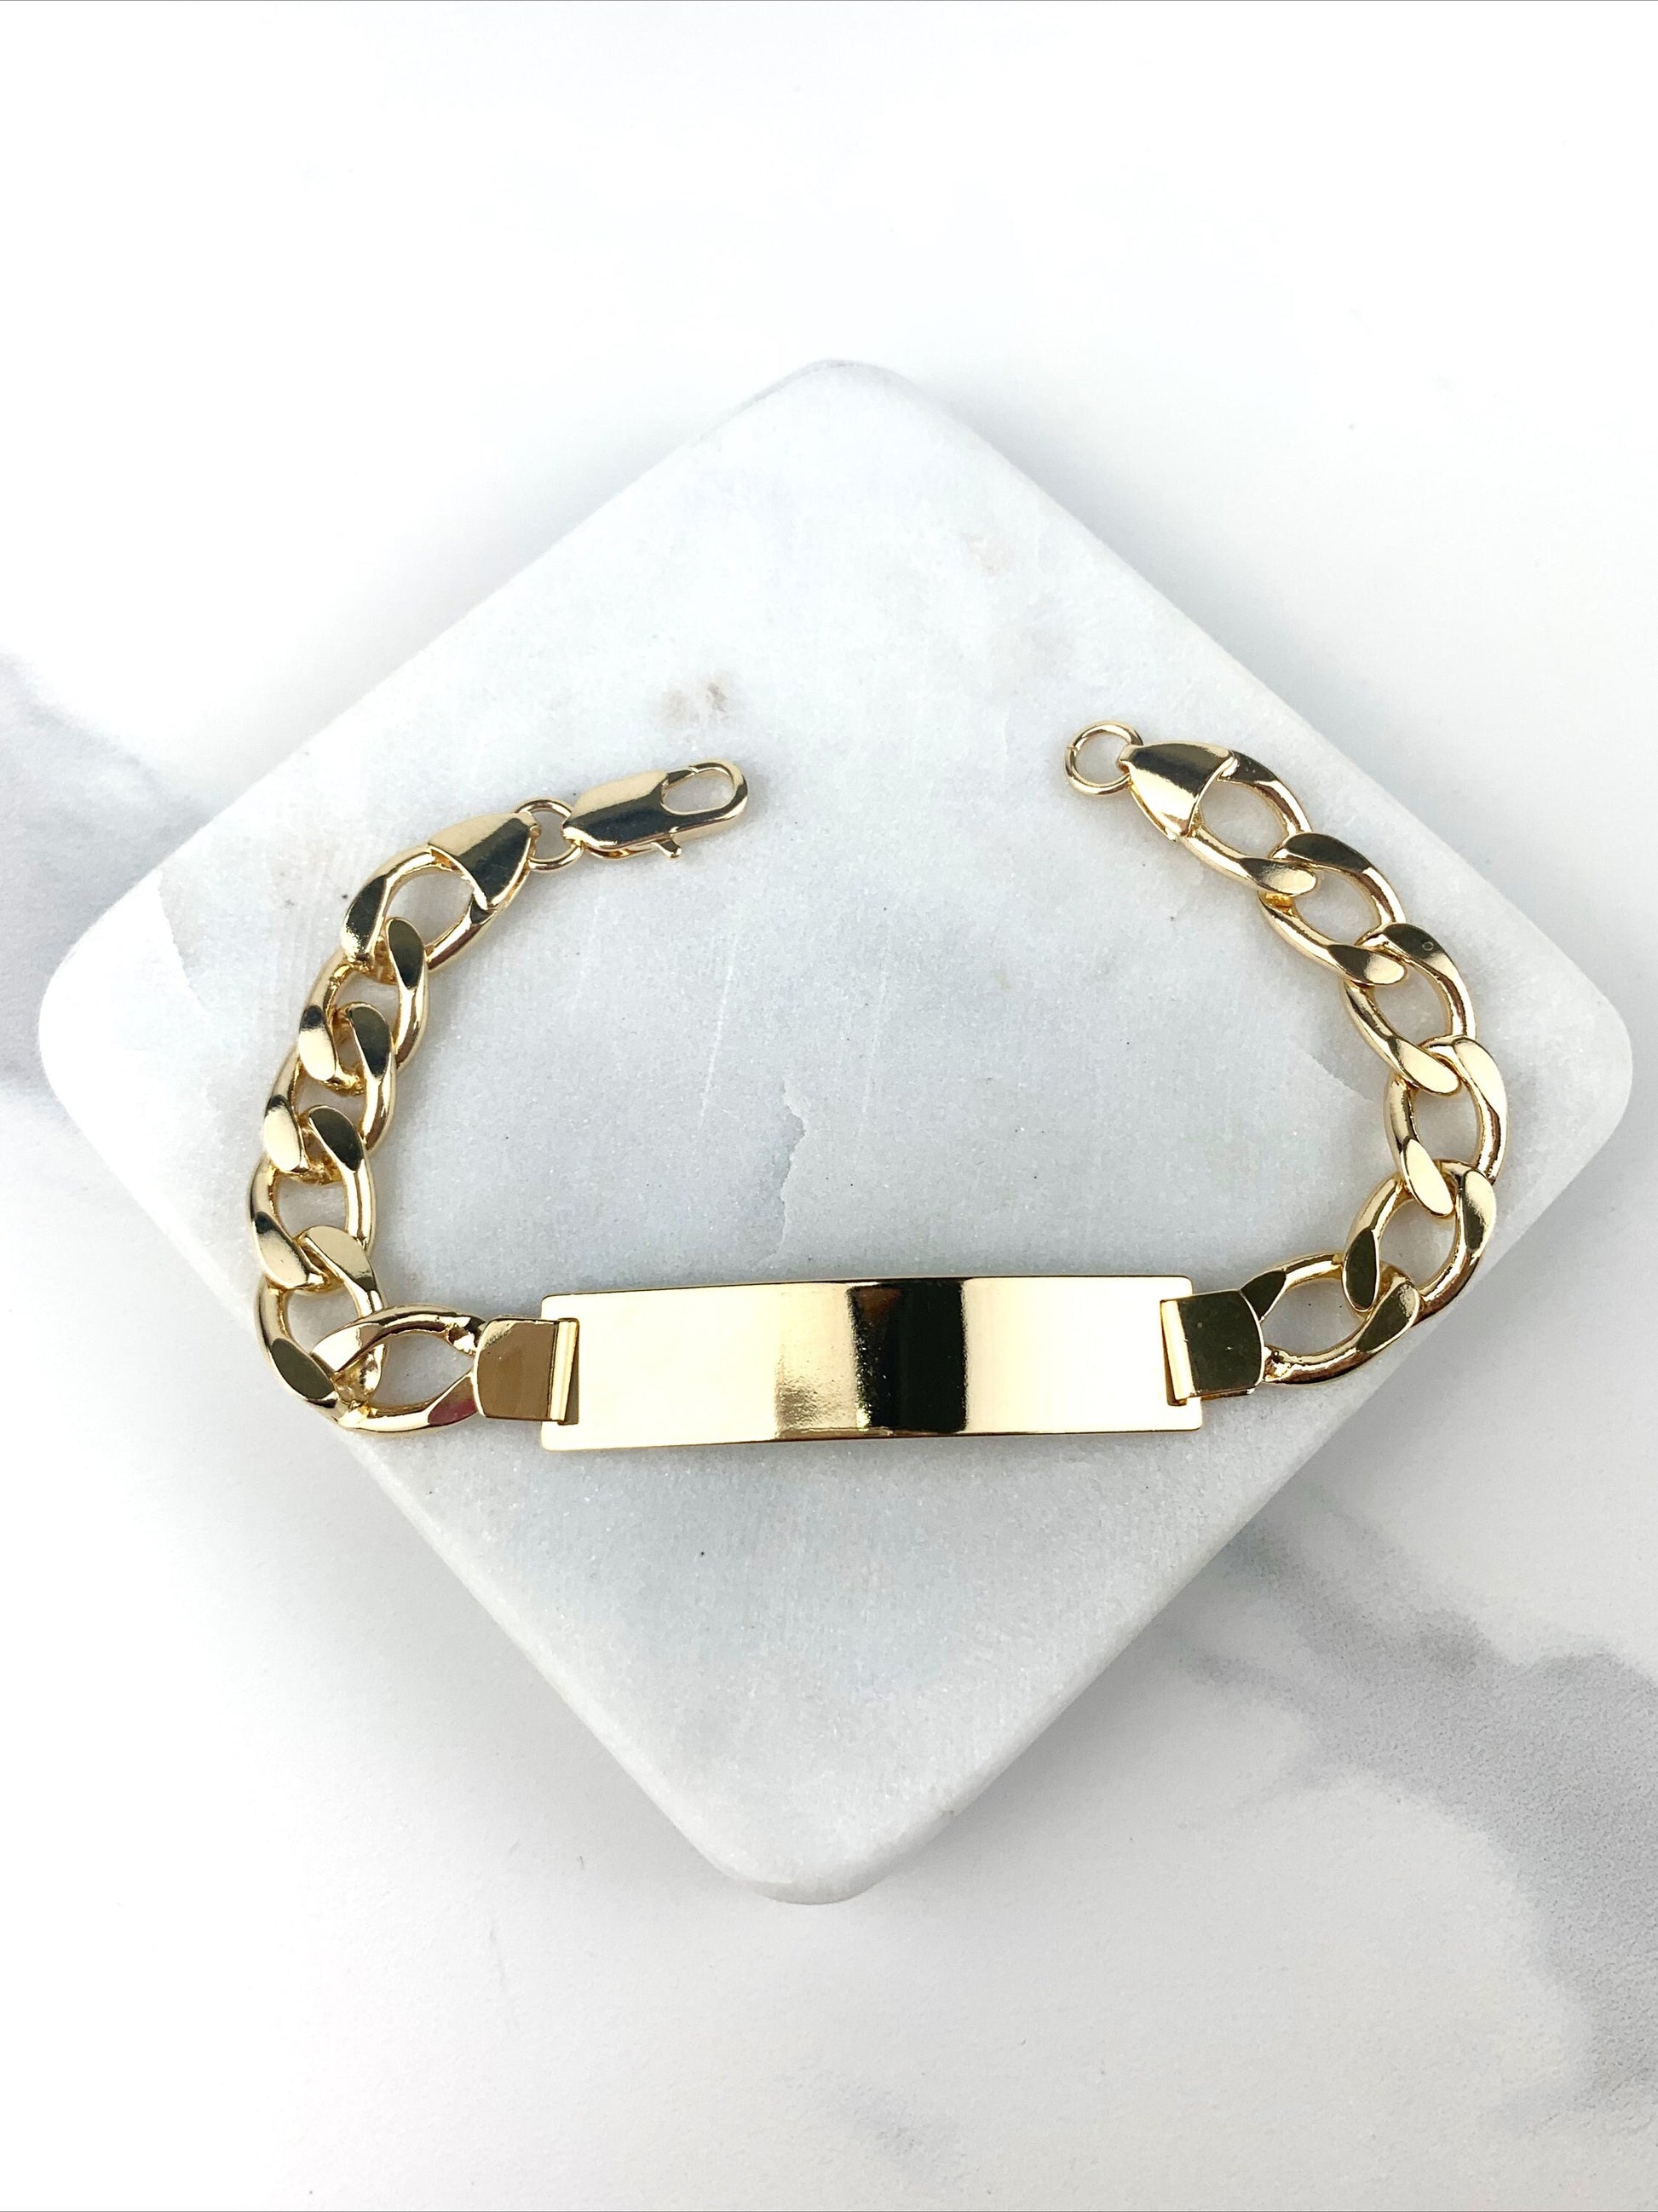 18k Gold Filled Men ID Bracelet For Wholesale and Jewelry Supplies